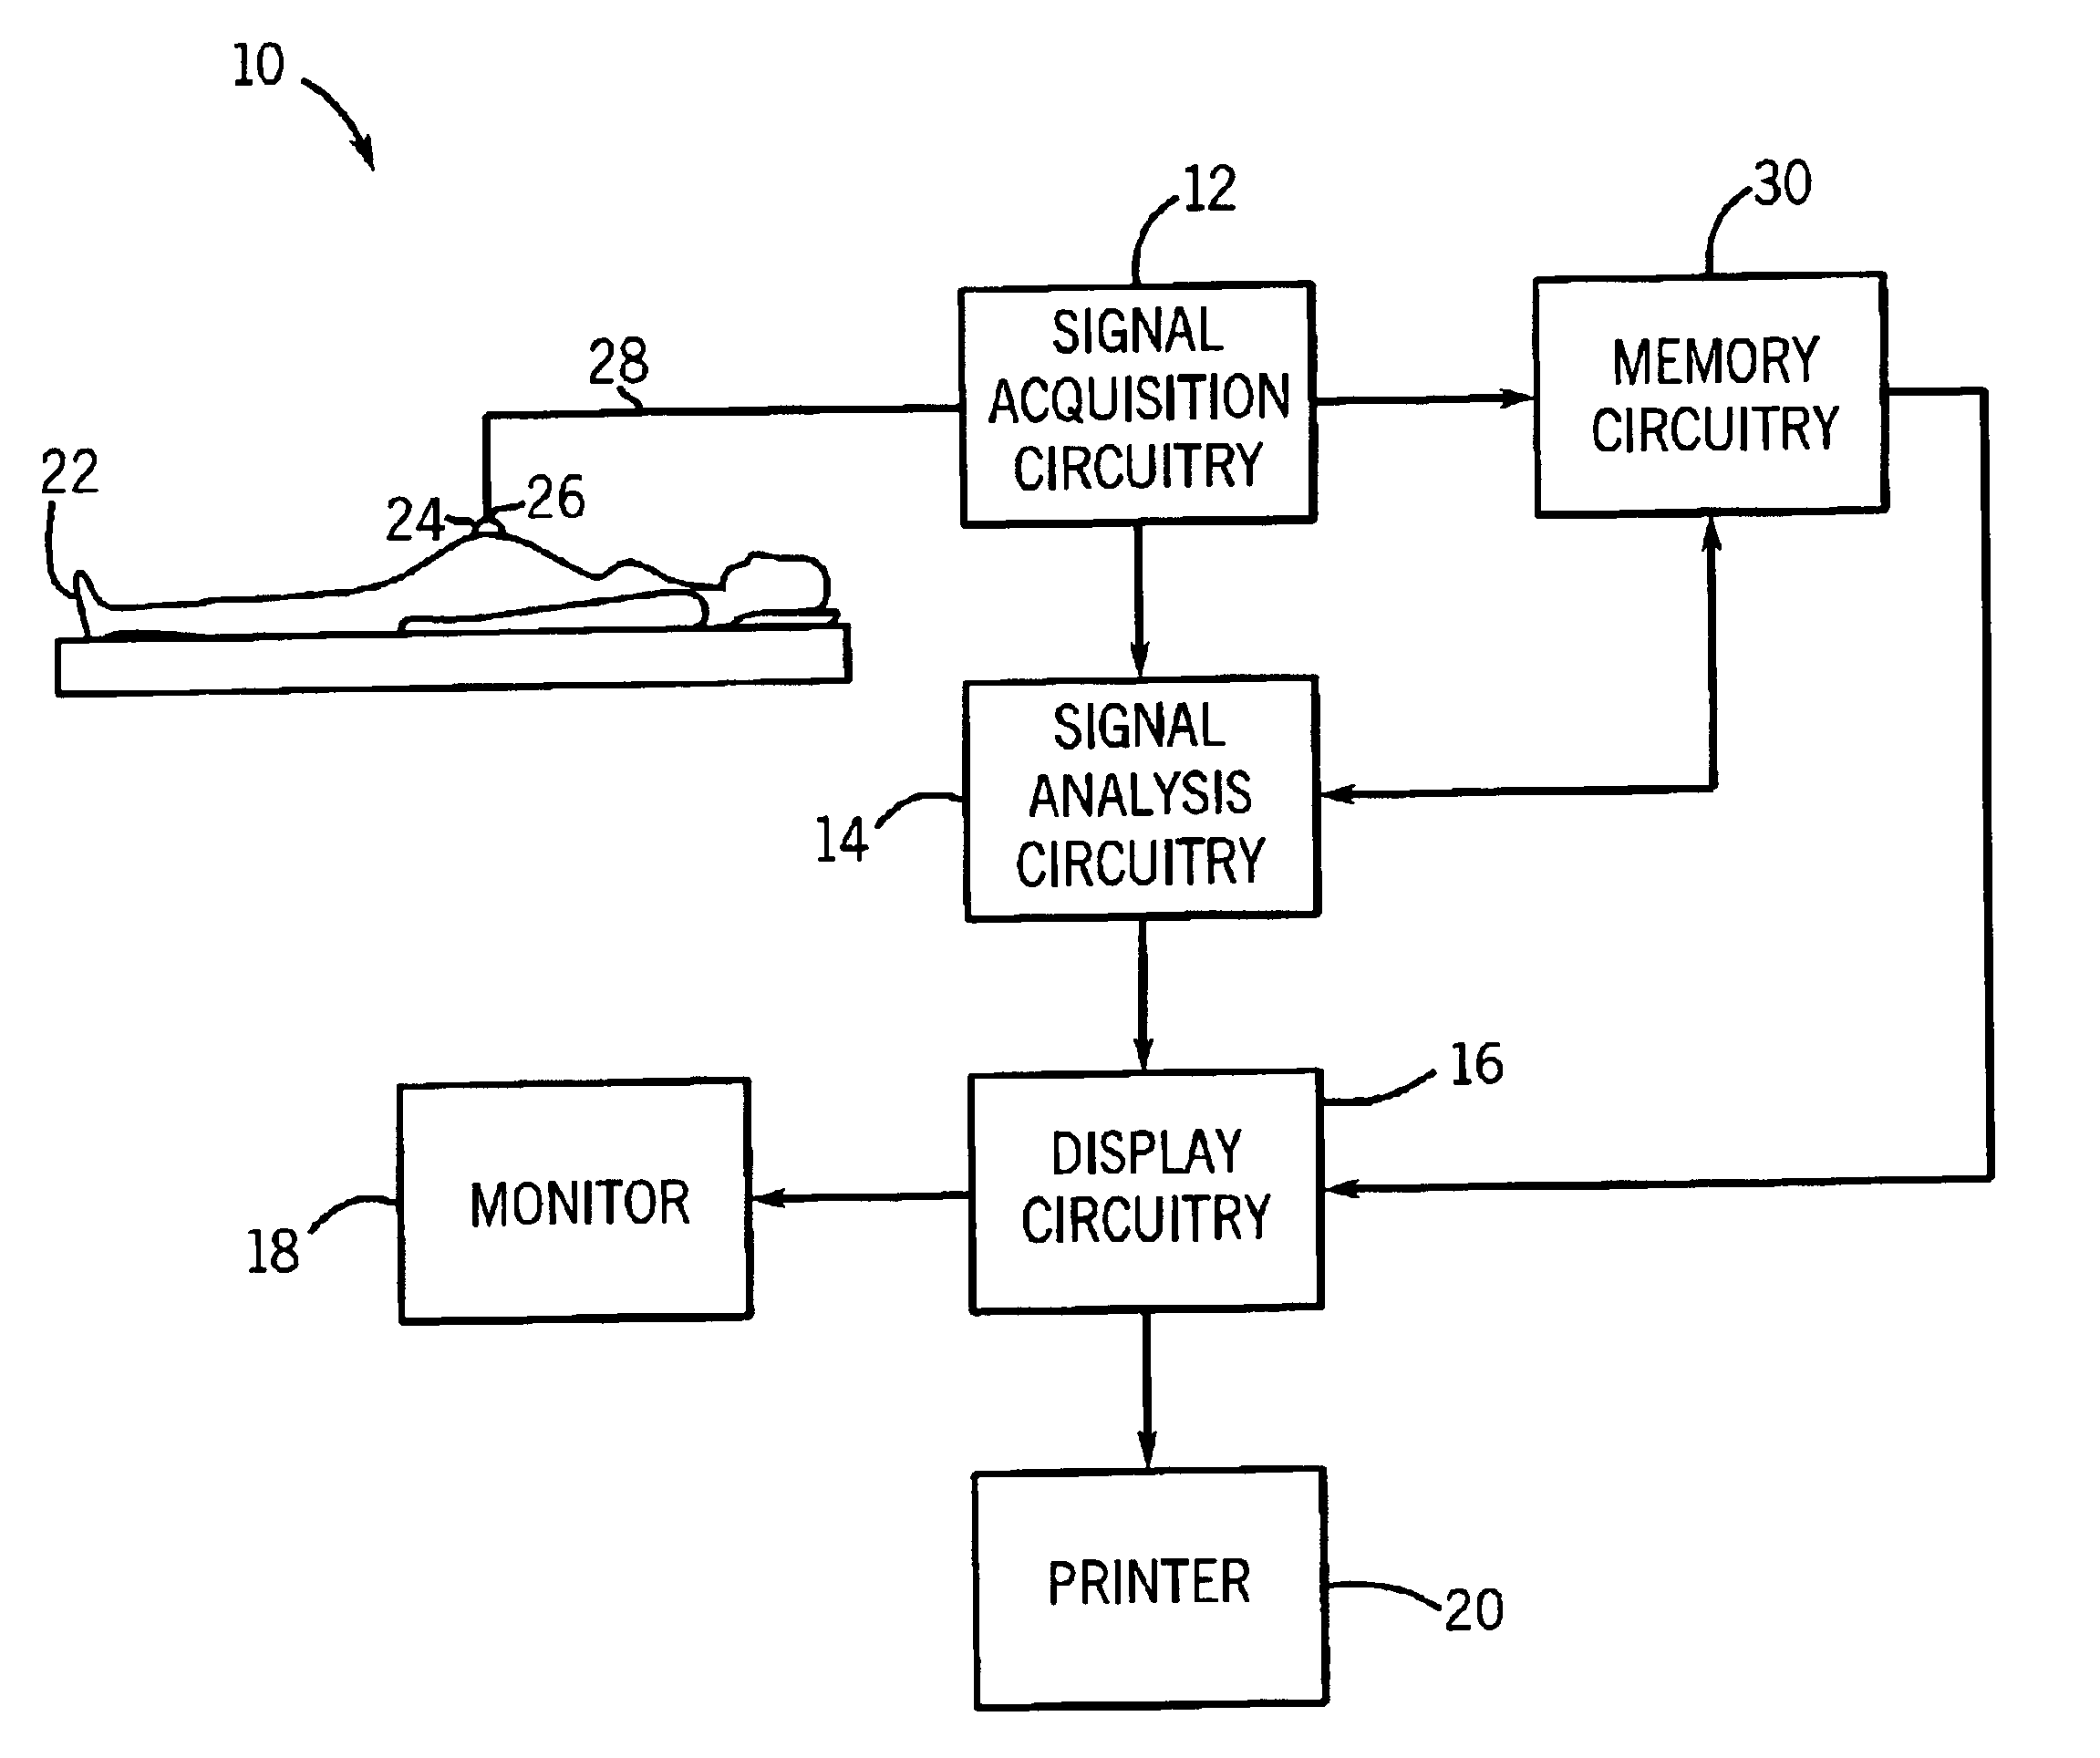 Method and apparatus for detecting weak physiological signals